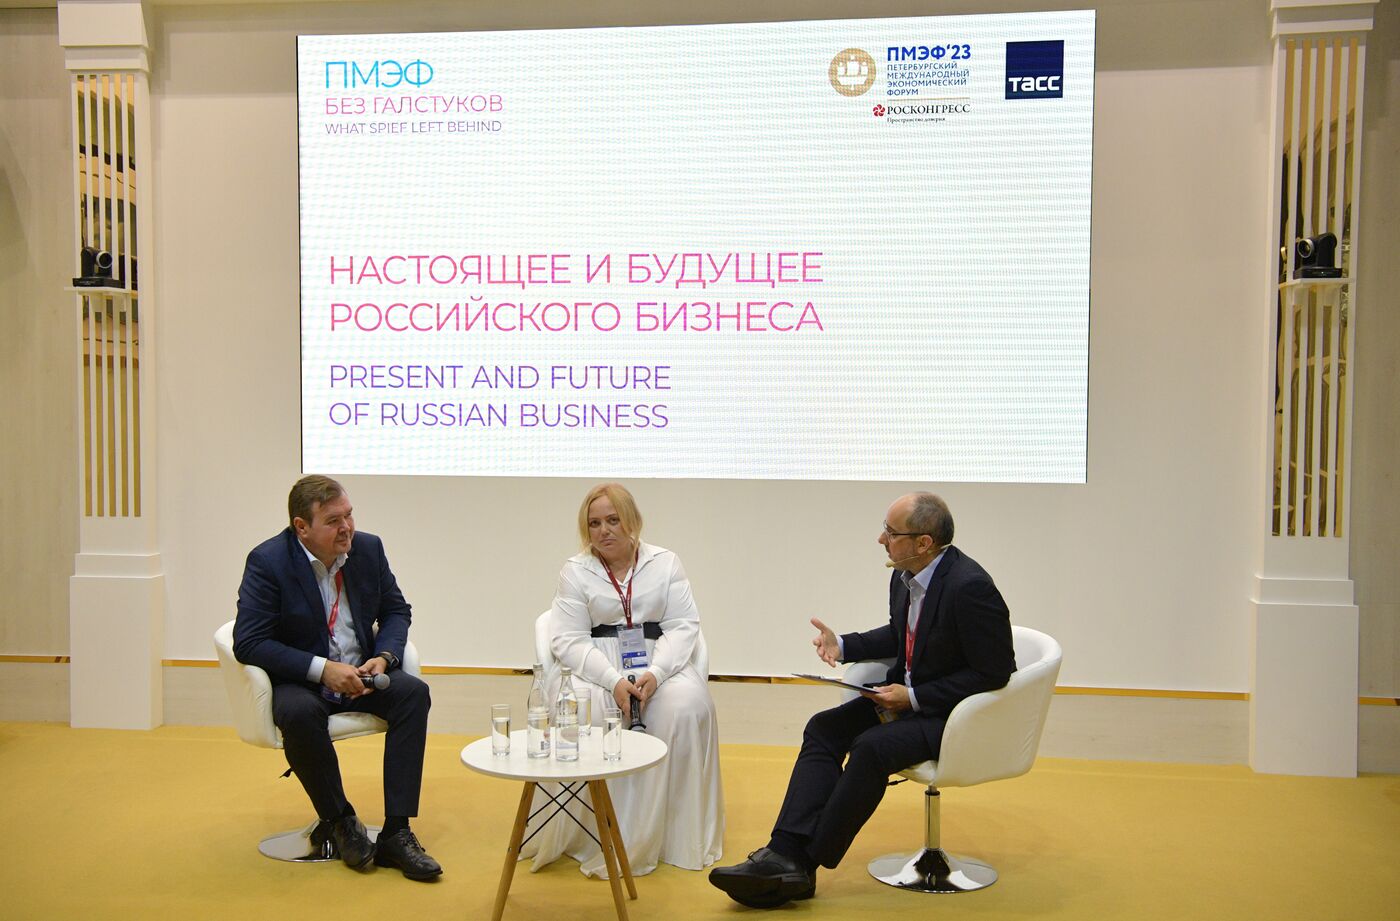 SPIEF-2023. Present and Future of Russian Business